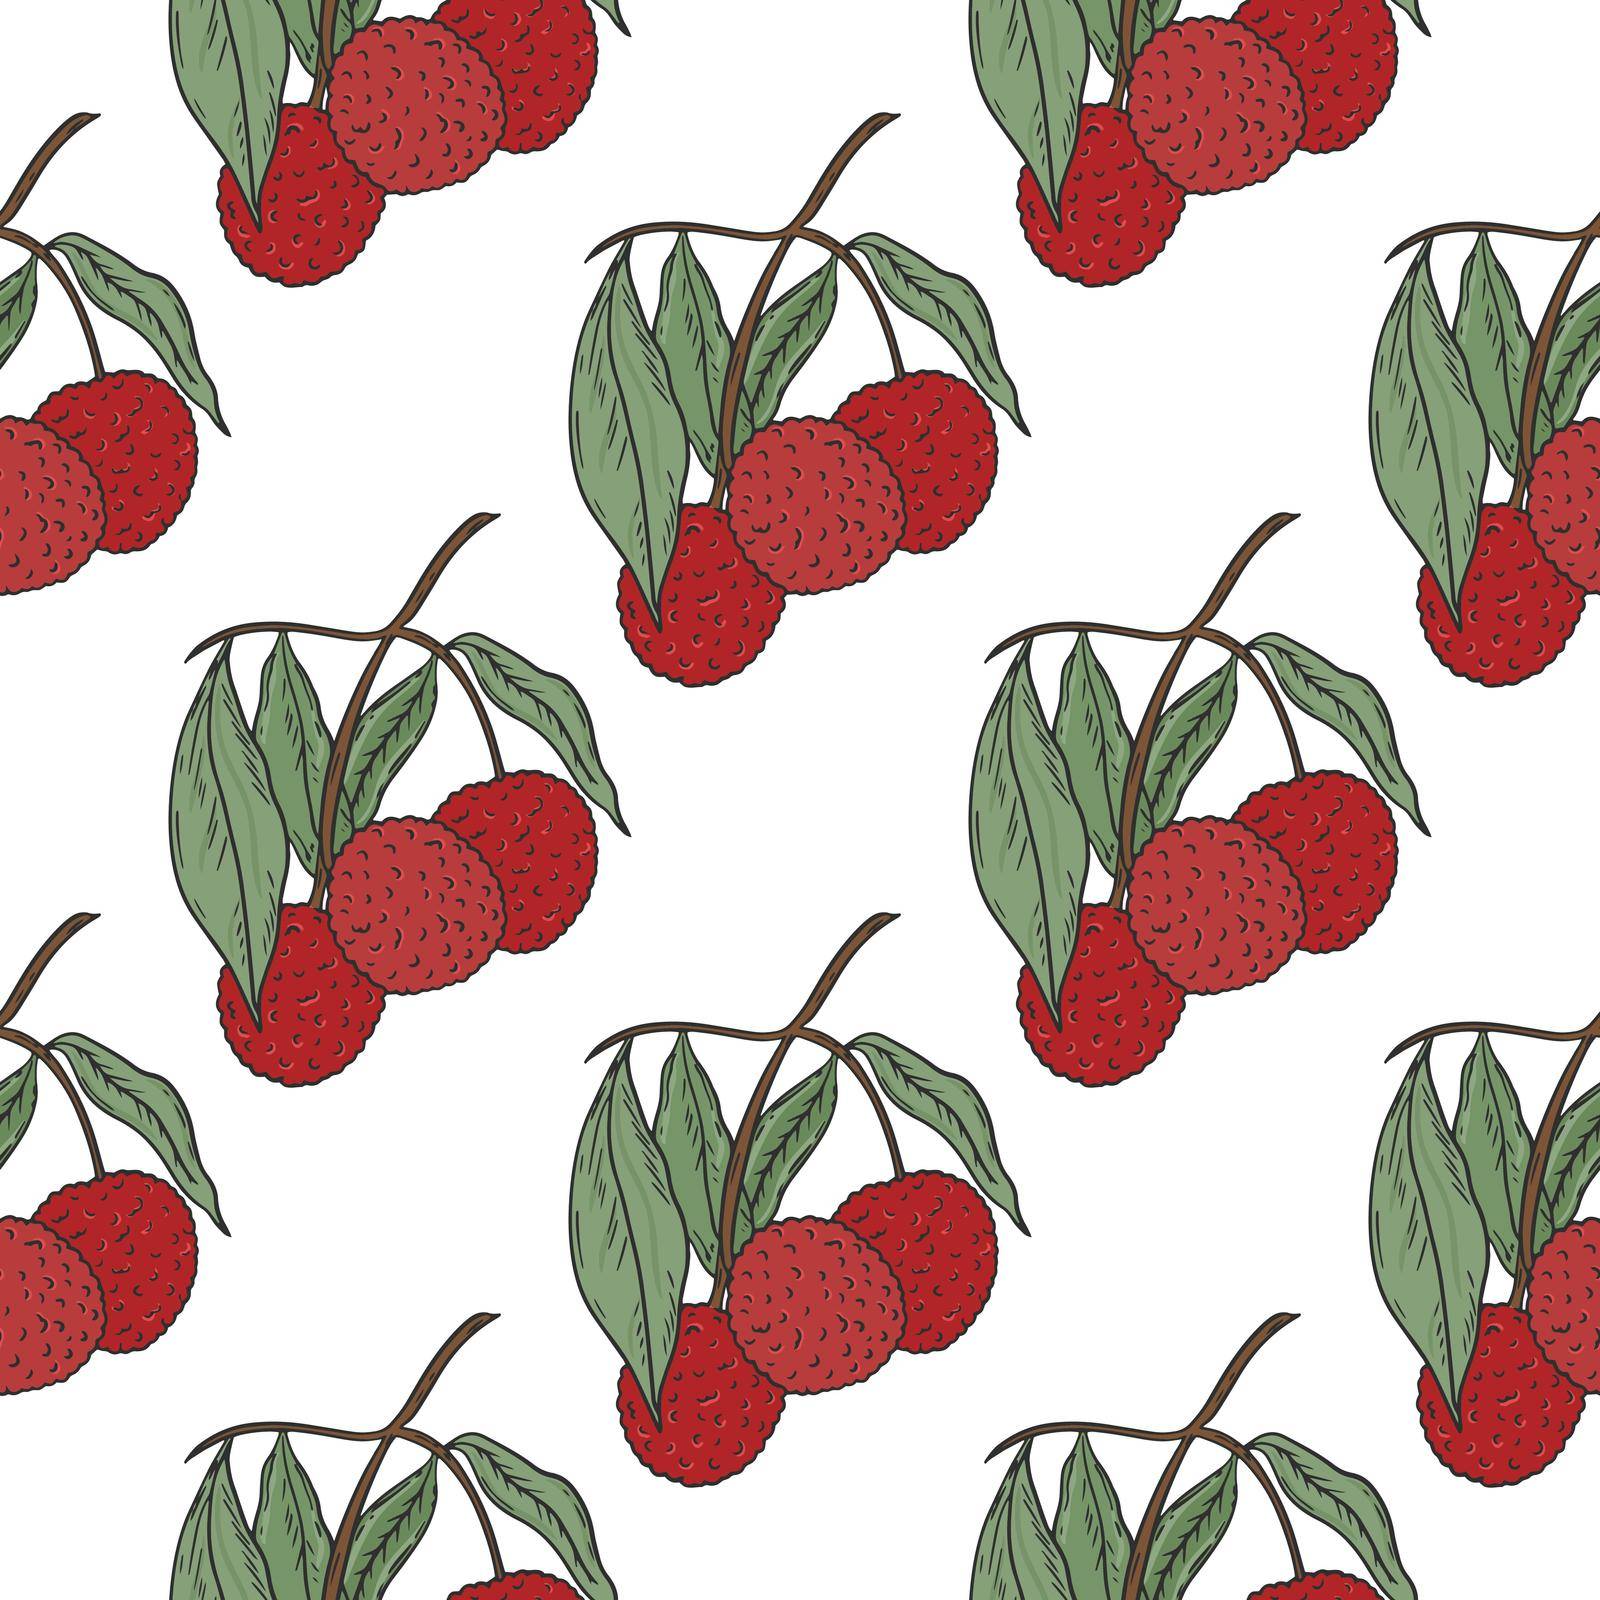 Lychee fruit on twig seamless pattern. Background with exotic,tropical fruits. Template for wallpaper, fabric and packaging, vector illustration